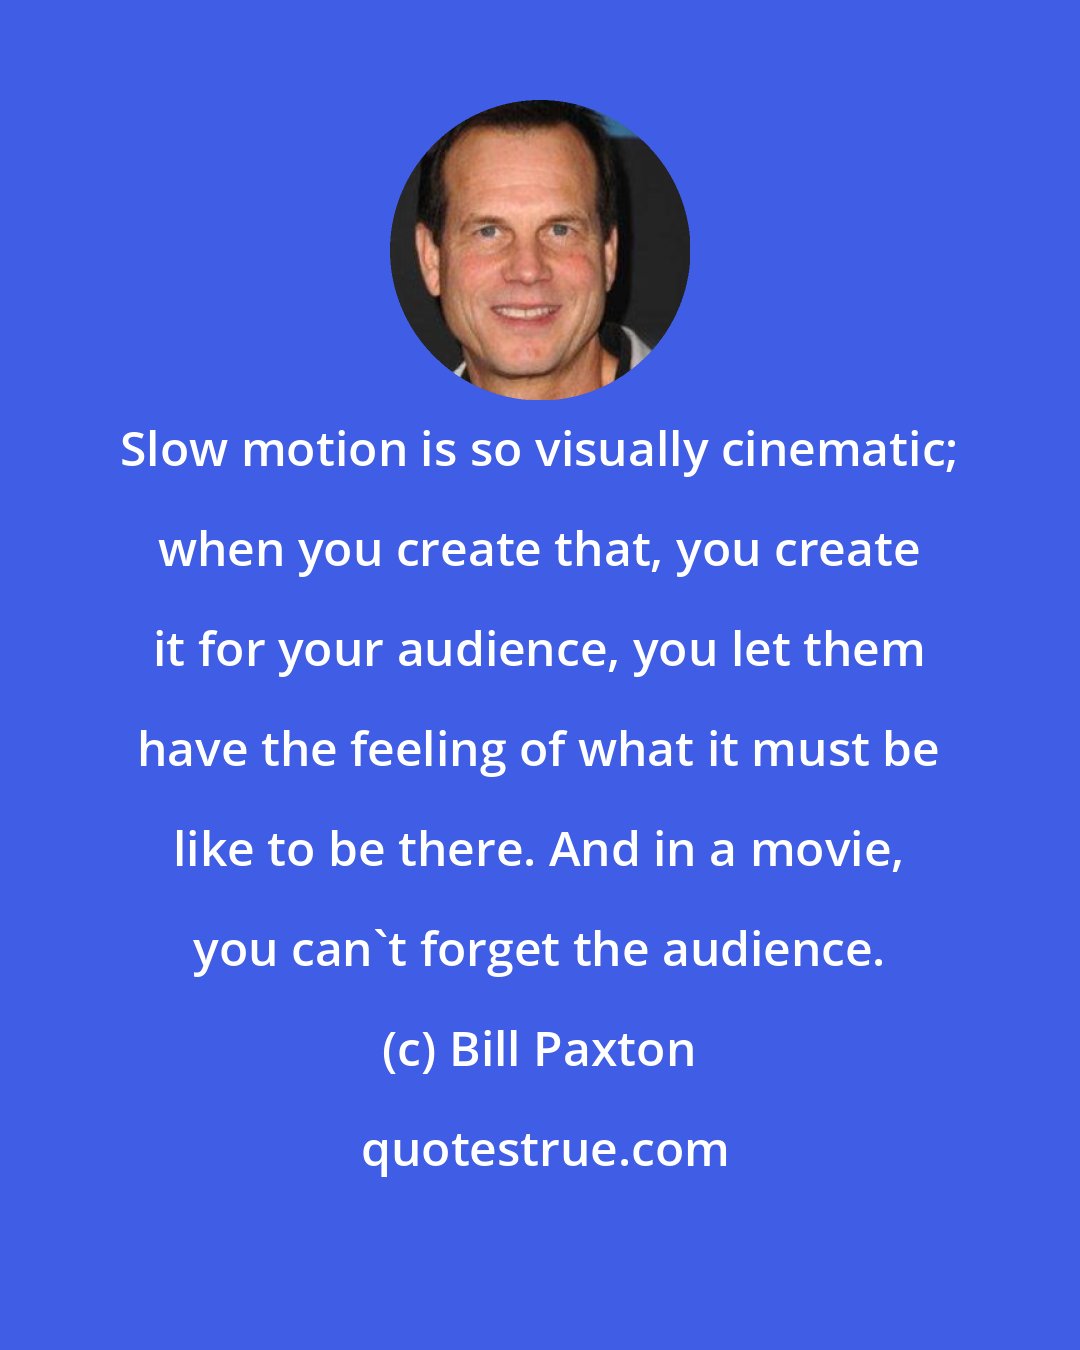 Bill Paxton: Slow motion is so visually cinematic; when you create that, you create it for your audience, you let them have the feeling of what it must be like to be there. And in a movie, you can't forget the audience.